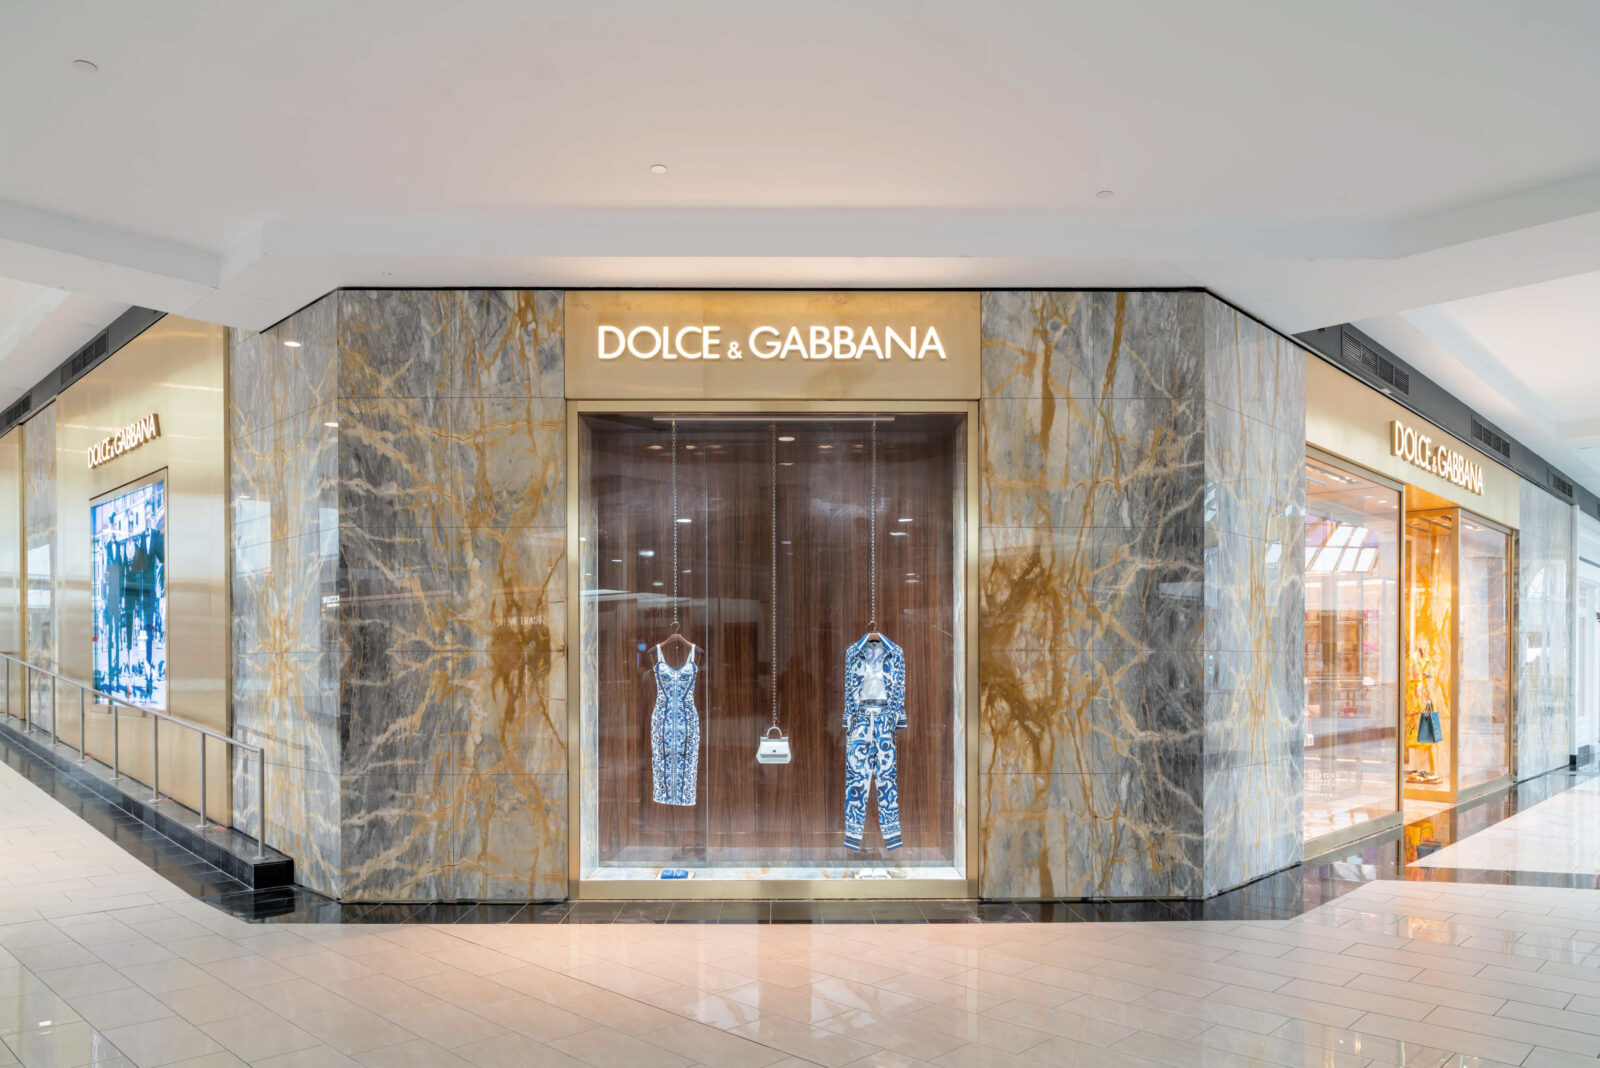 Dolce and Gabbana - Lalire March Architects